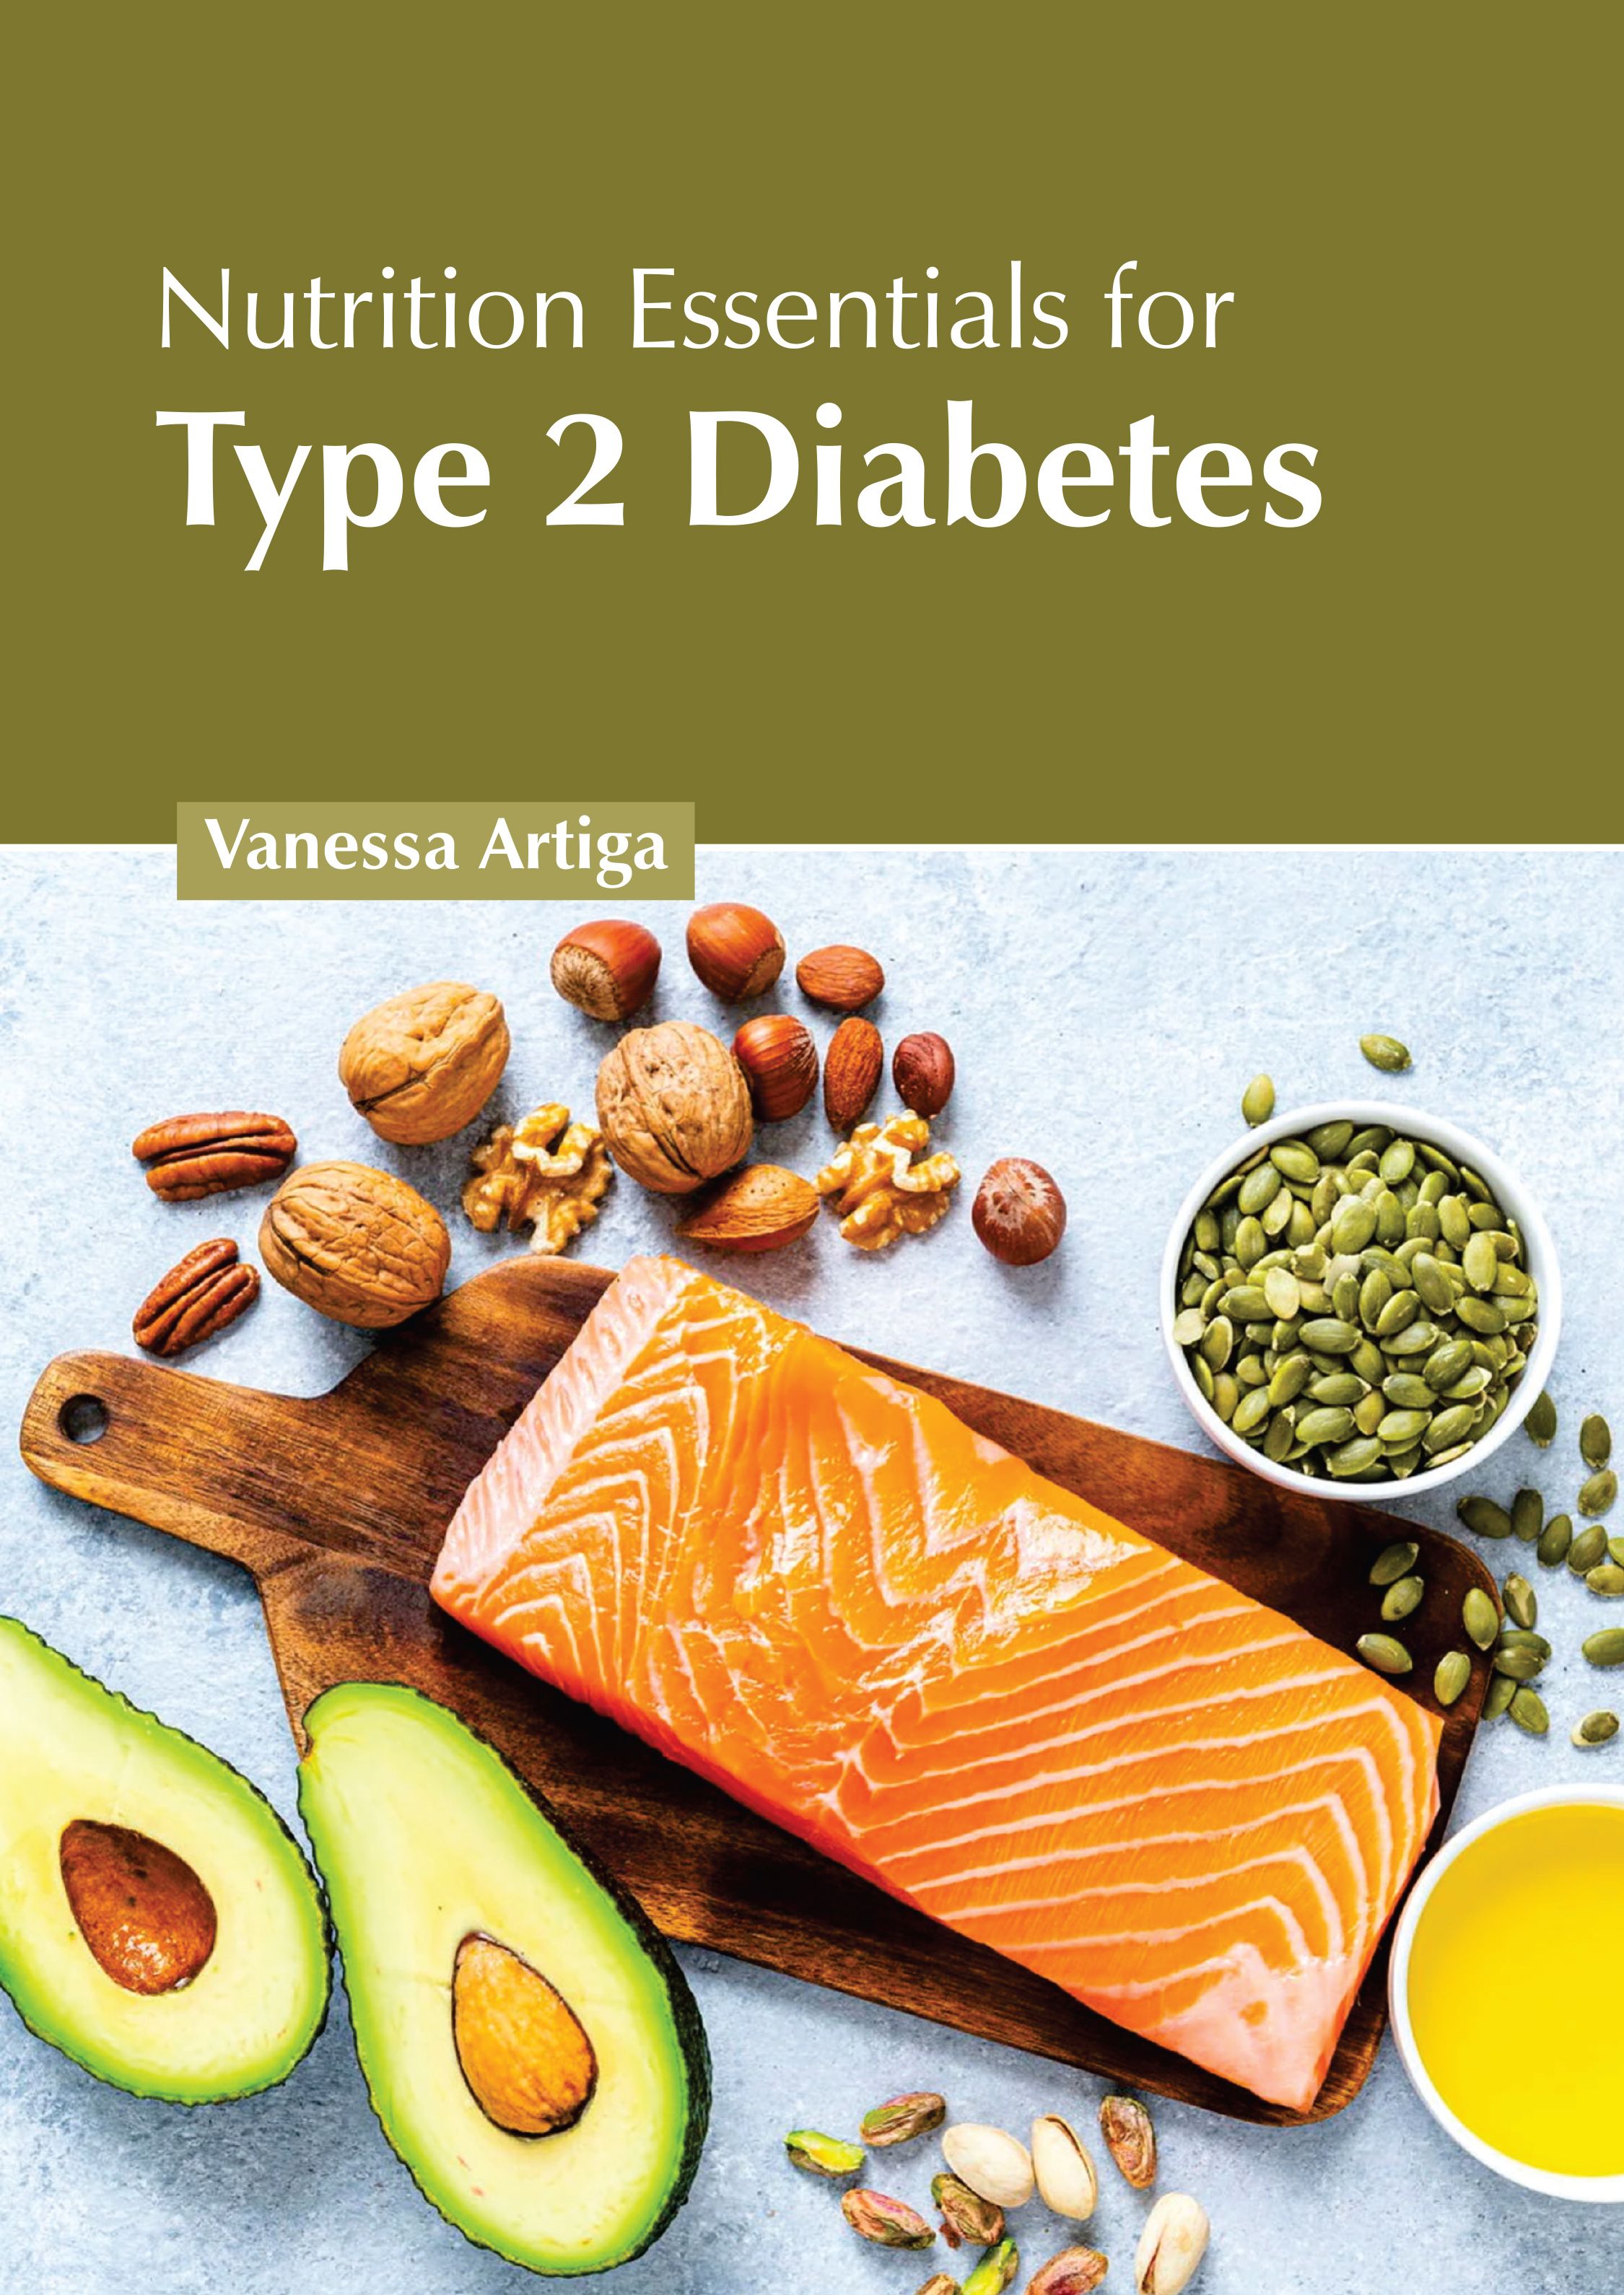 NUTRITION ESSENTIALS FOR TYPE 2 DIABETES